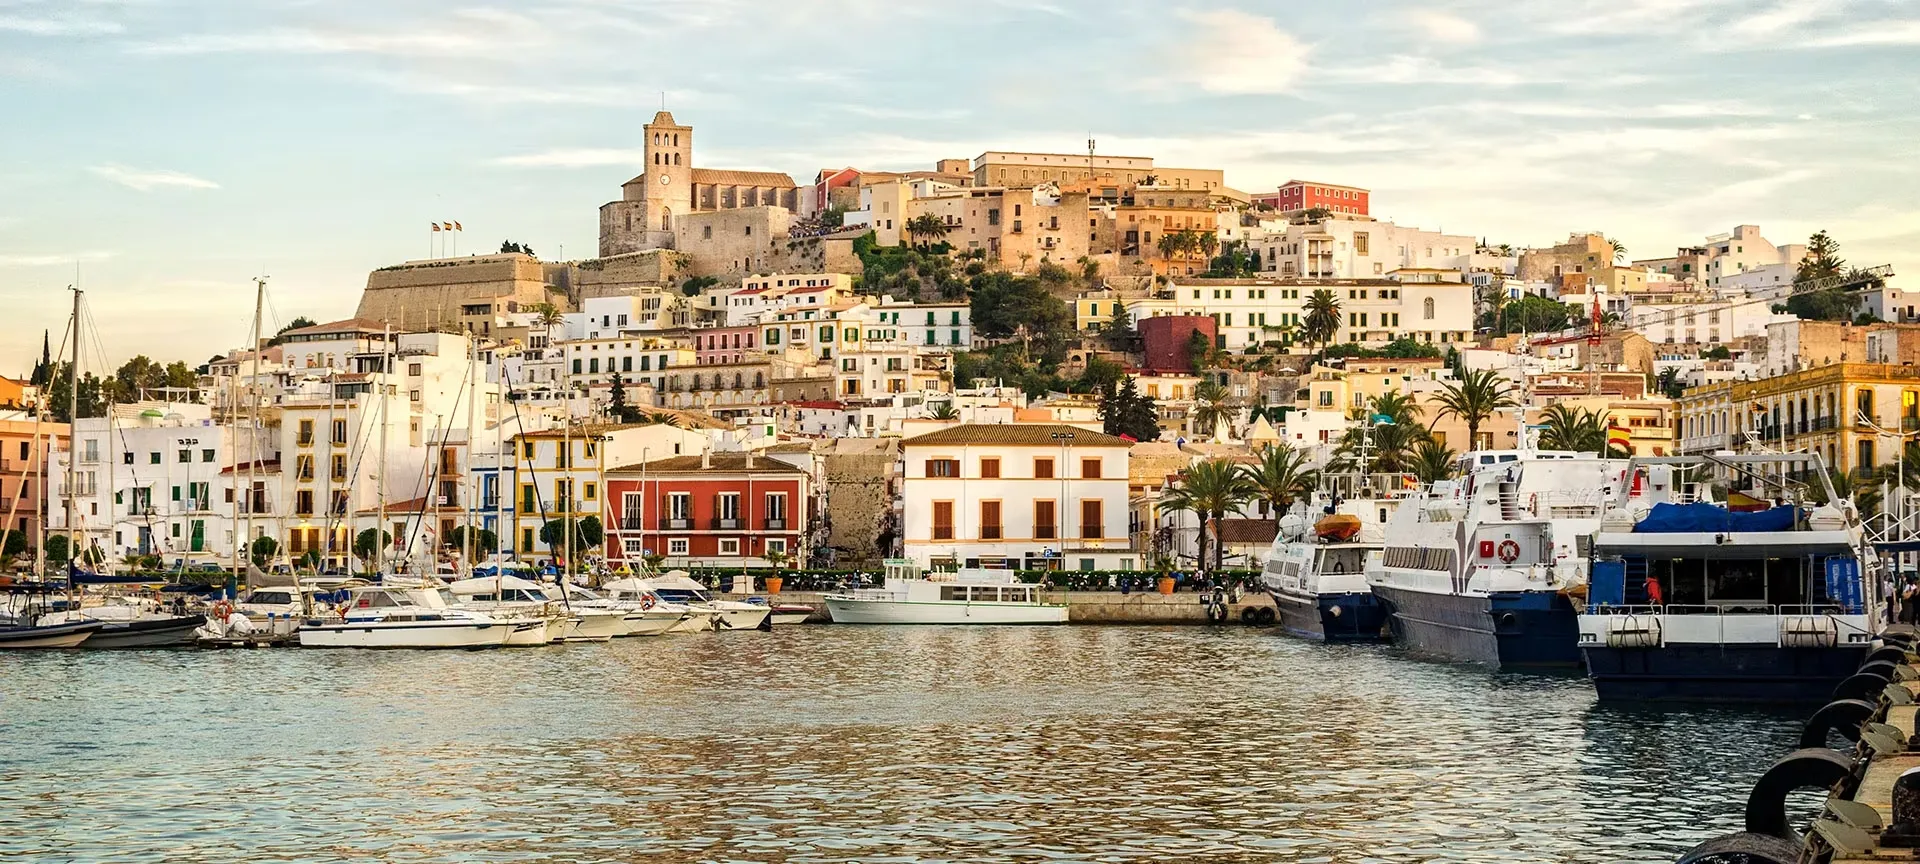 Eivissa Harbour in Spain, Europe | Architecture - Rated 4.1